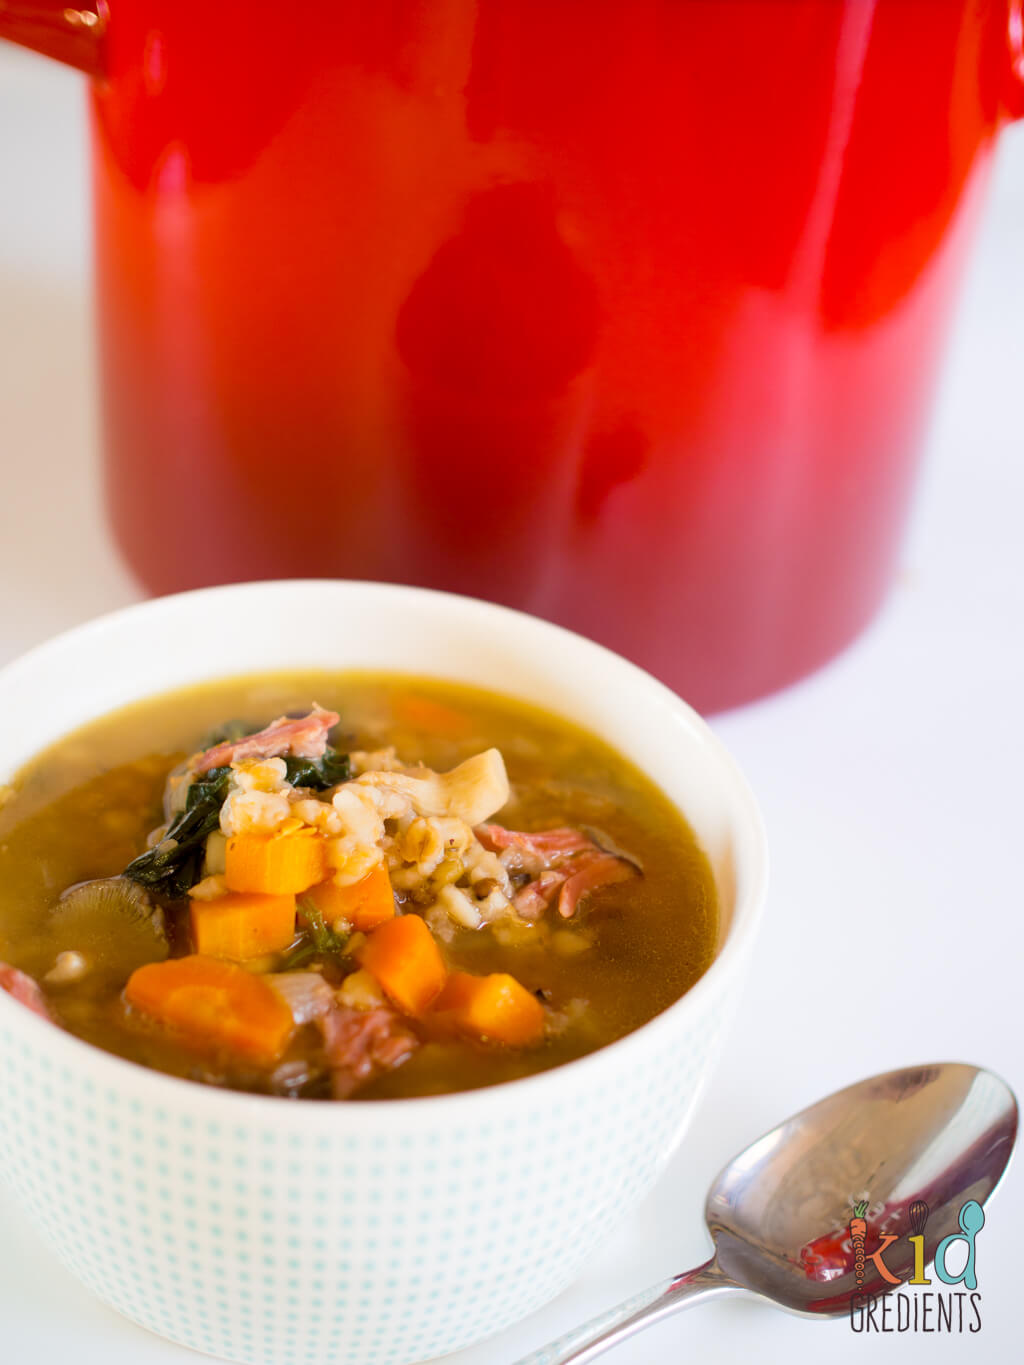 A bowl of soup with meat and vegetables in a cup